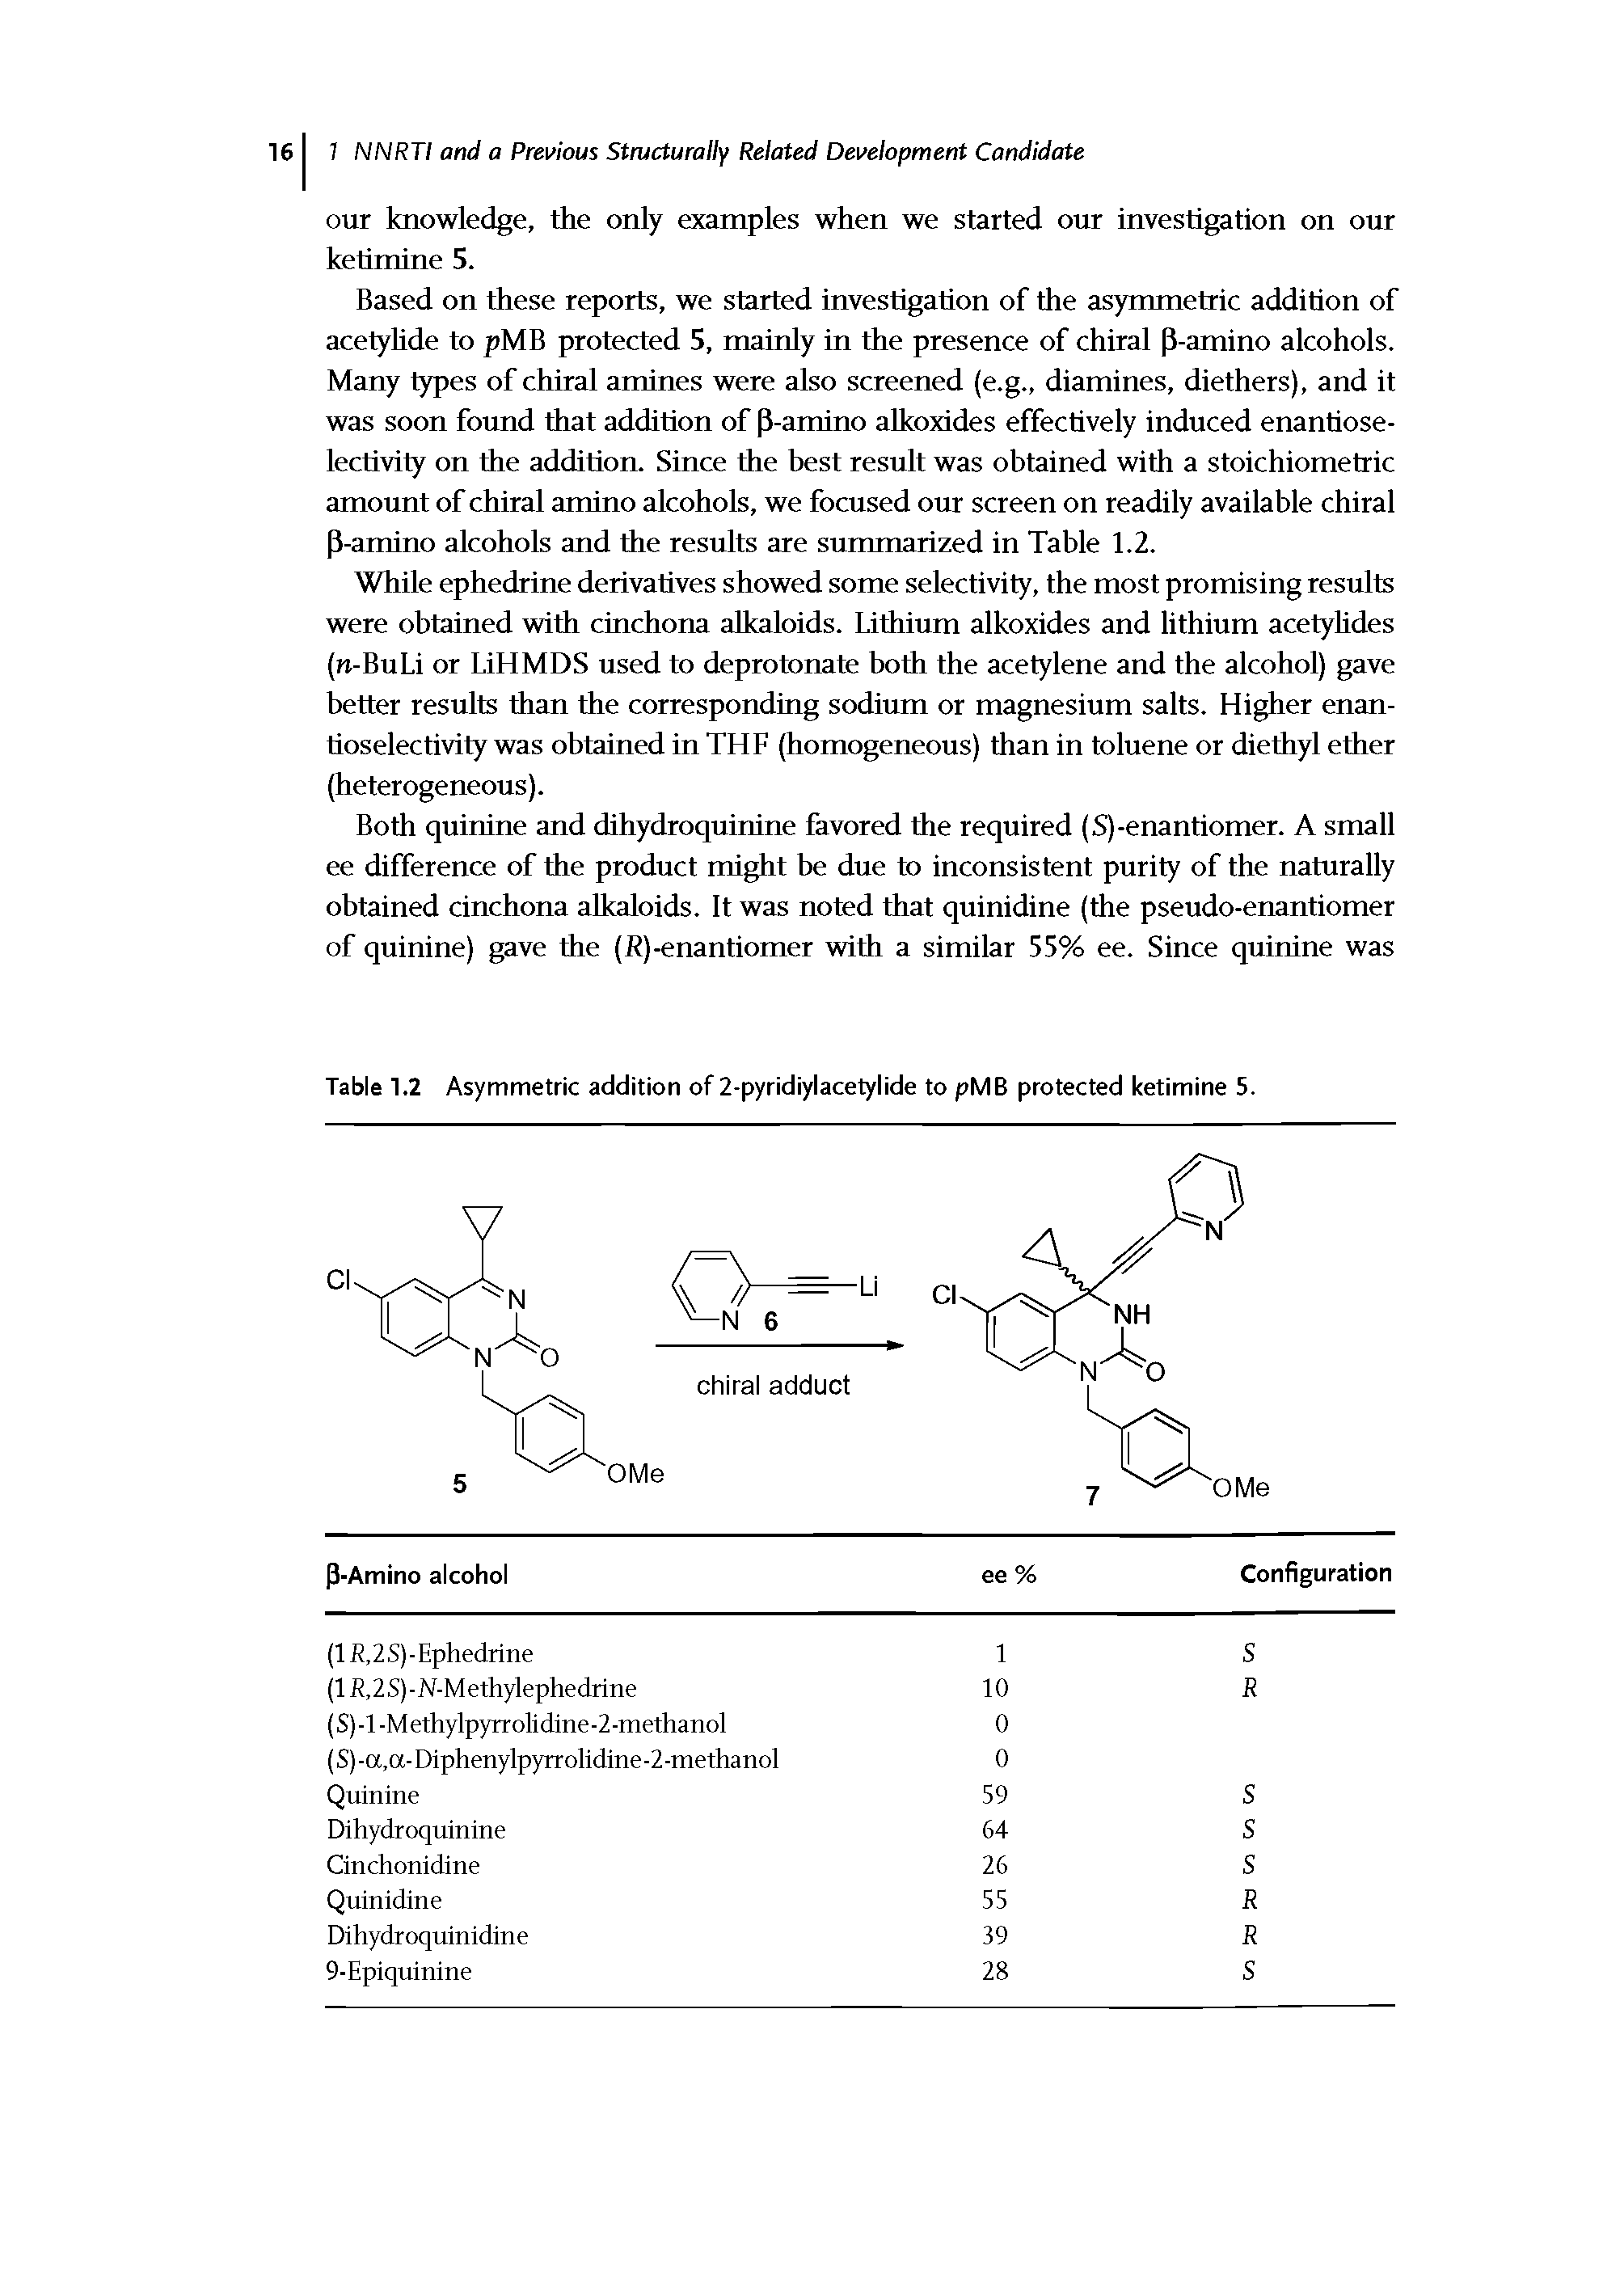 Table 1.2 Asymmetric addition of 2-pyridiylacetylide to pMB protected ketimine 5.